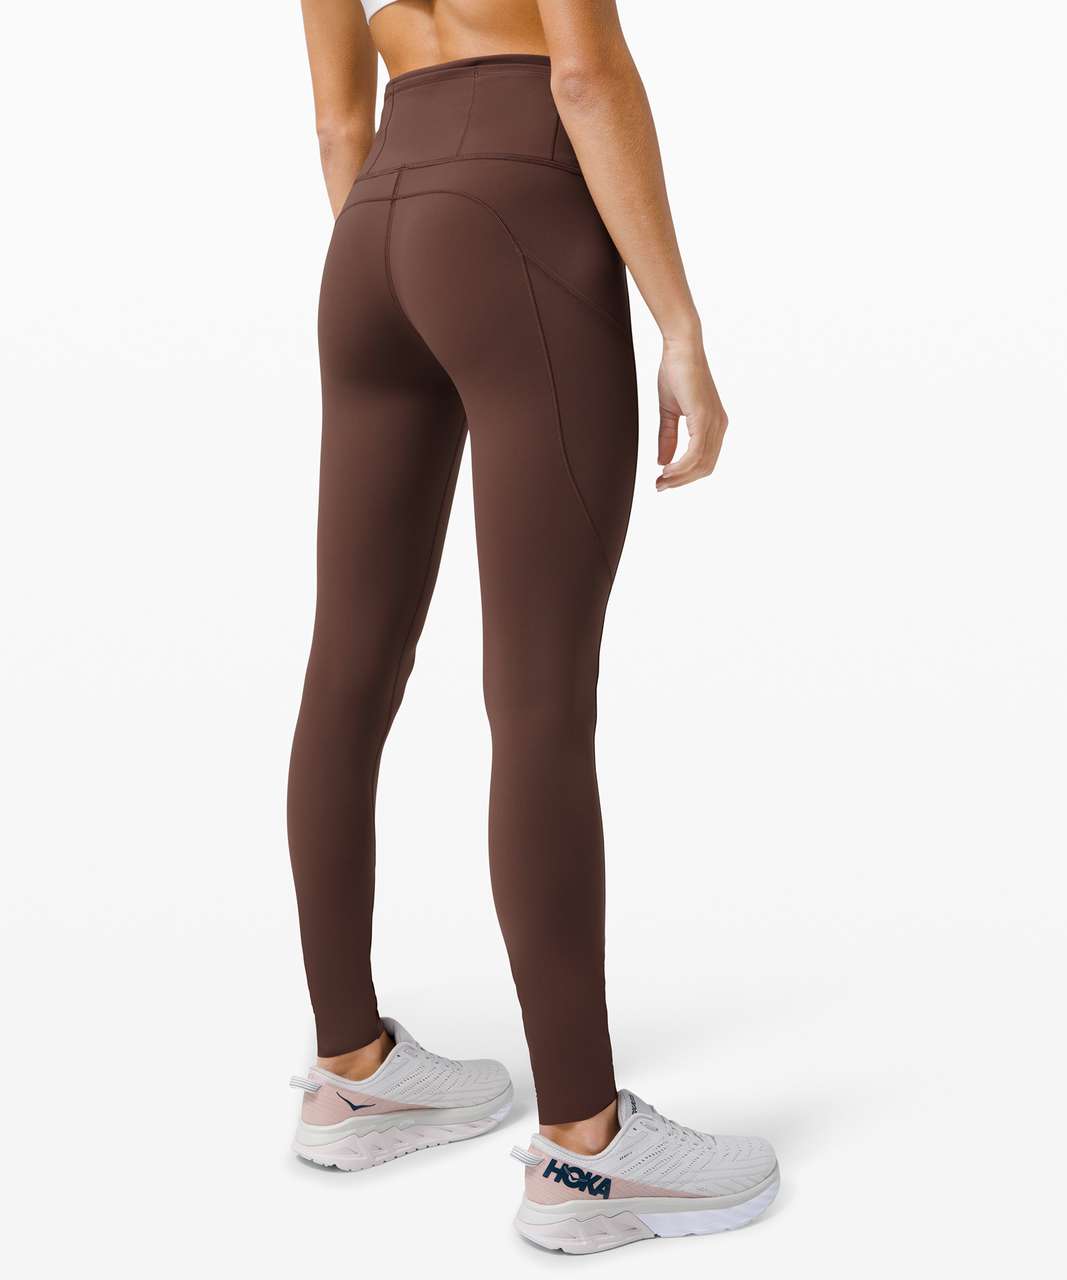 Lululemon Fast and Free Tight 28" *Non-Reflective - Brown Earth